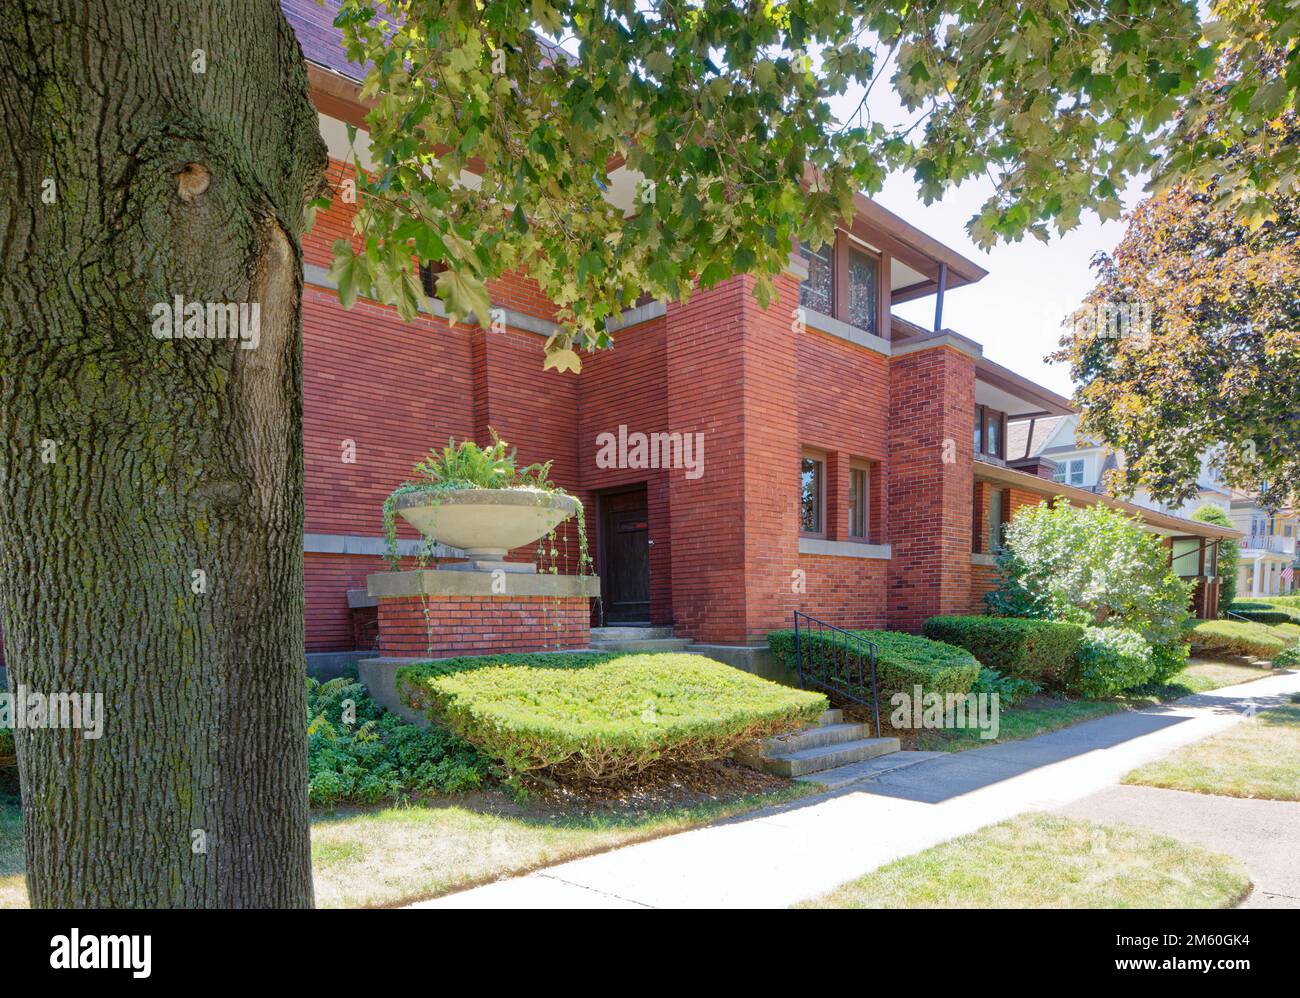 Frank Lloyd Wright’s William R. Heath House is unusual for being so close to a public street. Yet, it is built in Wright’s Prairie School style. Stock Photo